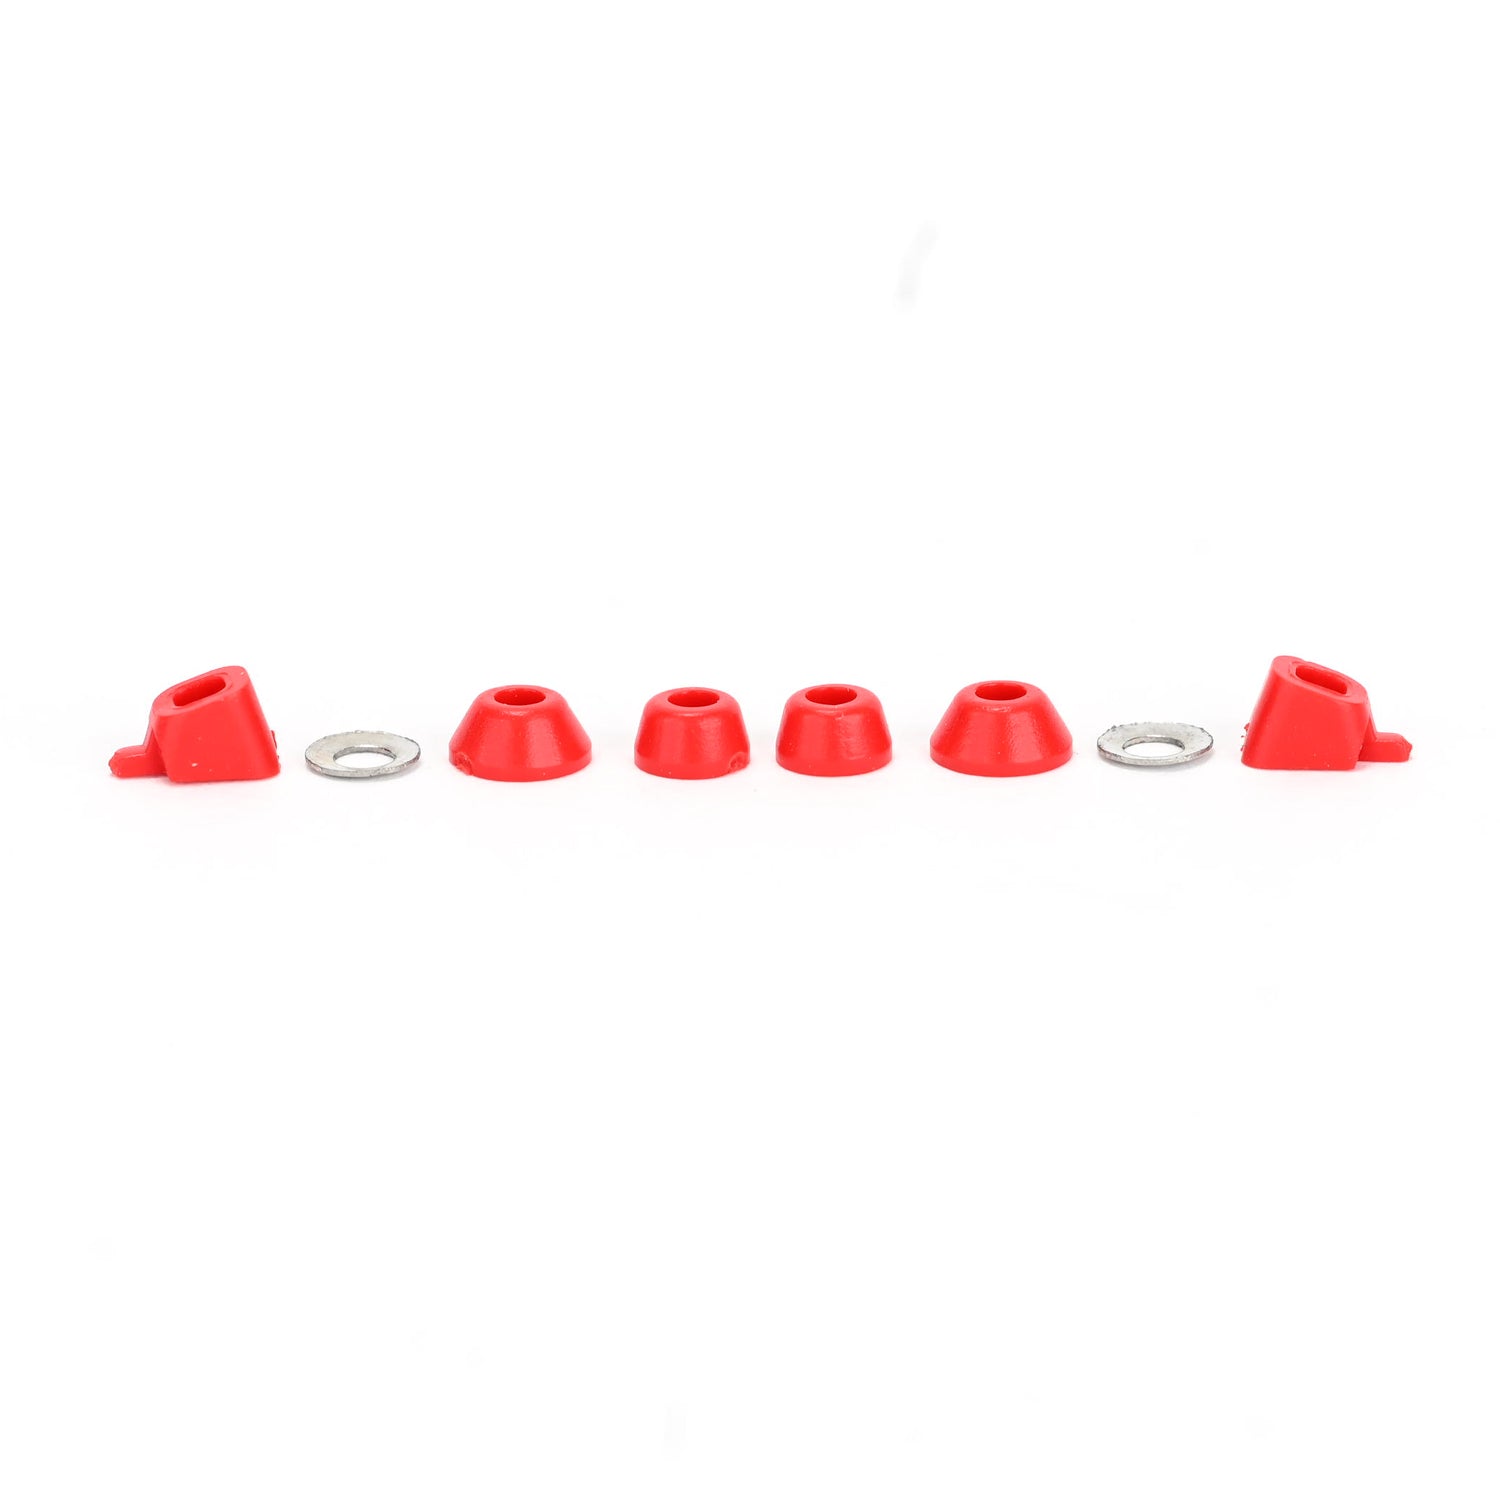 Hard Red Blackriver First Aid Fingerboard Bushings